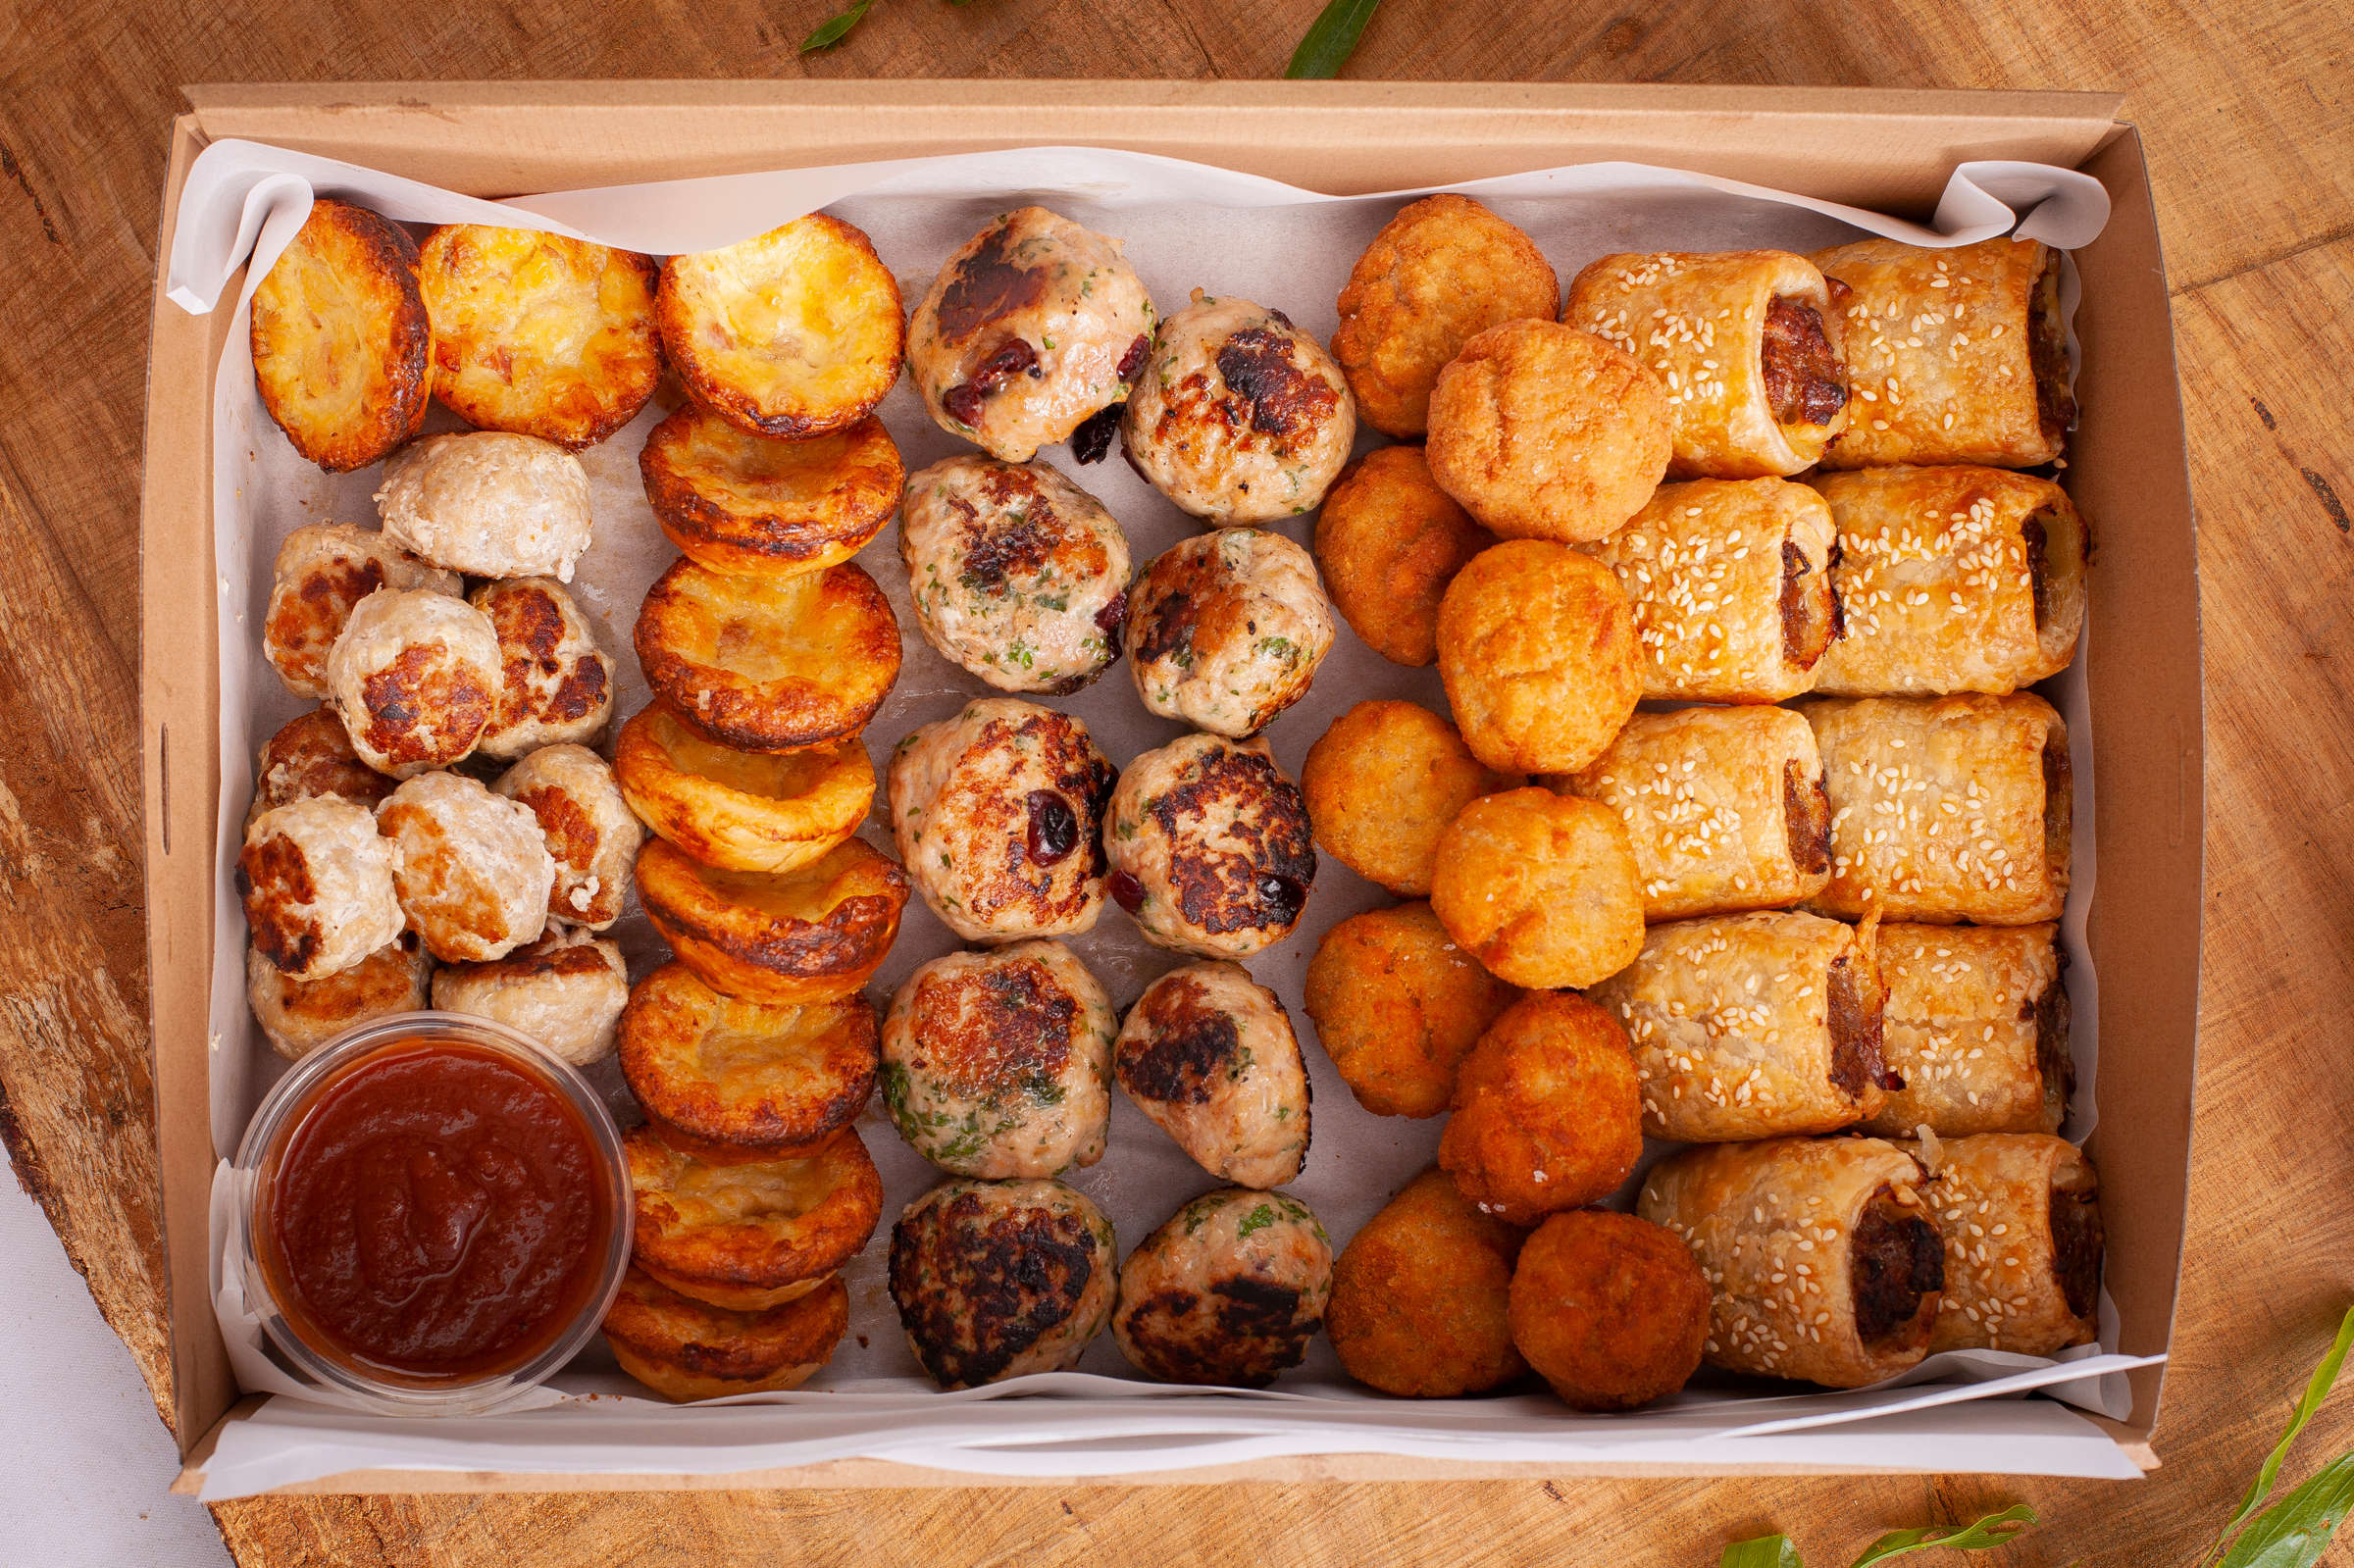 Hot Savoury box containing 50 items: Sausage rolls, Chicken balls, Smoked salmon arancini, Bacon and cheese tartlets, Meatballs. Credit: Richard Jupe.